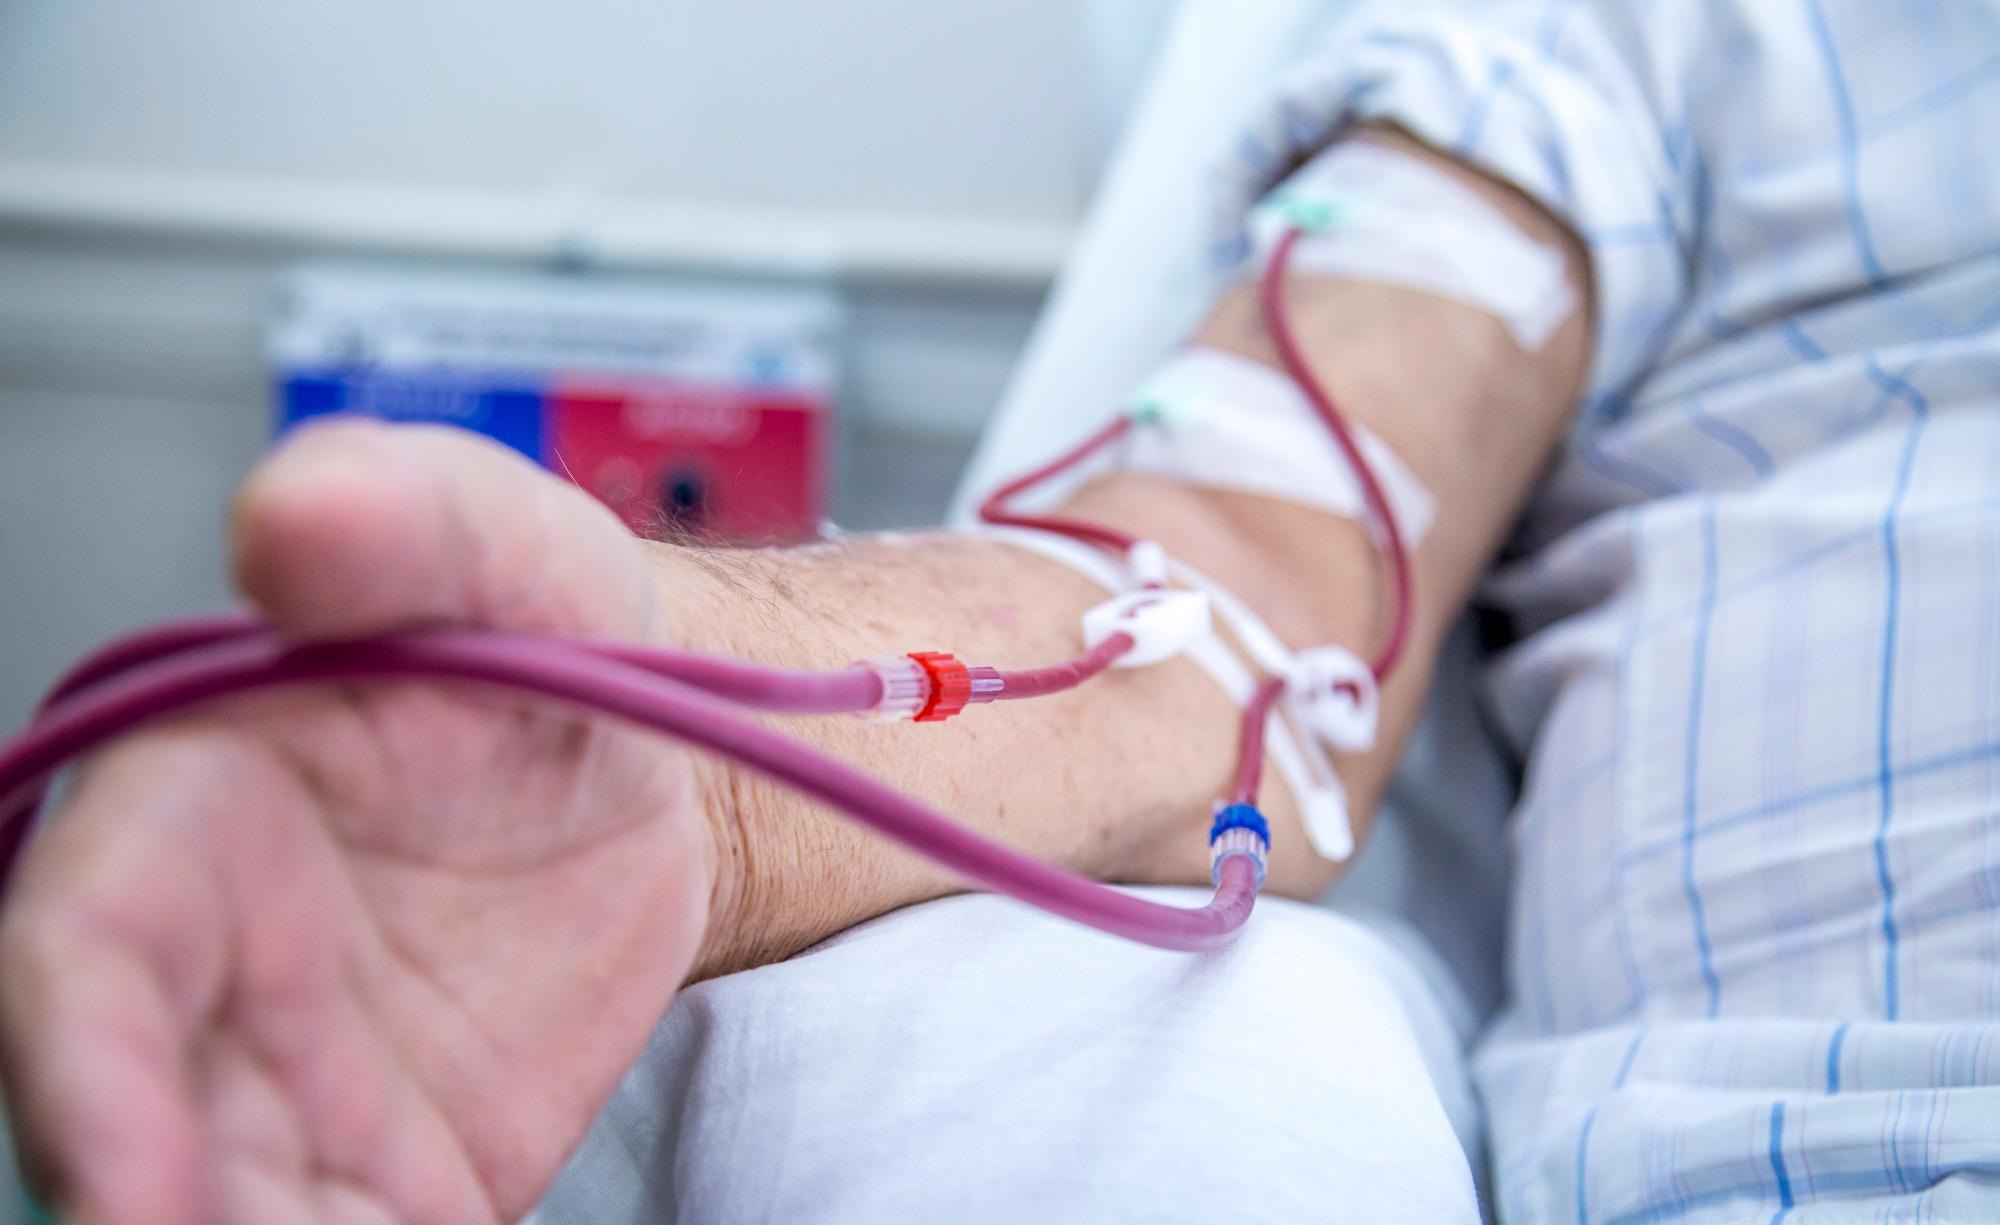 Study: SARS-CoV-2 infection during the Omicron surge among patients receiving dialysis: the role of circulating receptor-binding domain antibodies and vaccine doses. Image Credit: mailsonpignata / Shutterstock